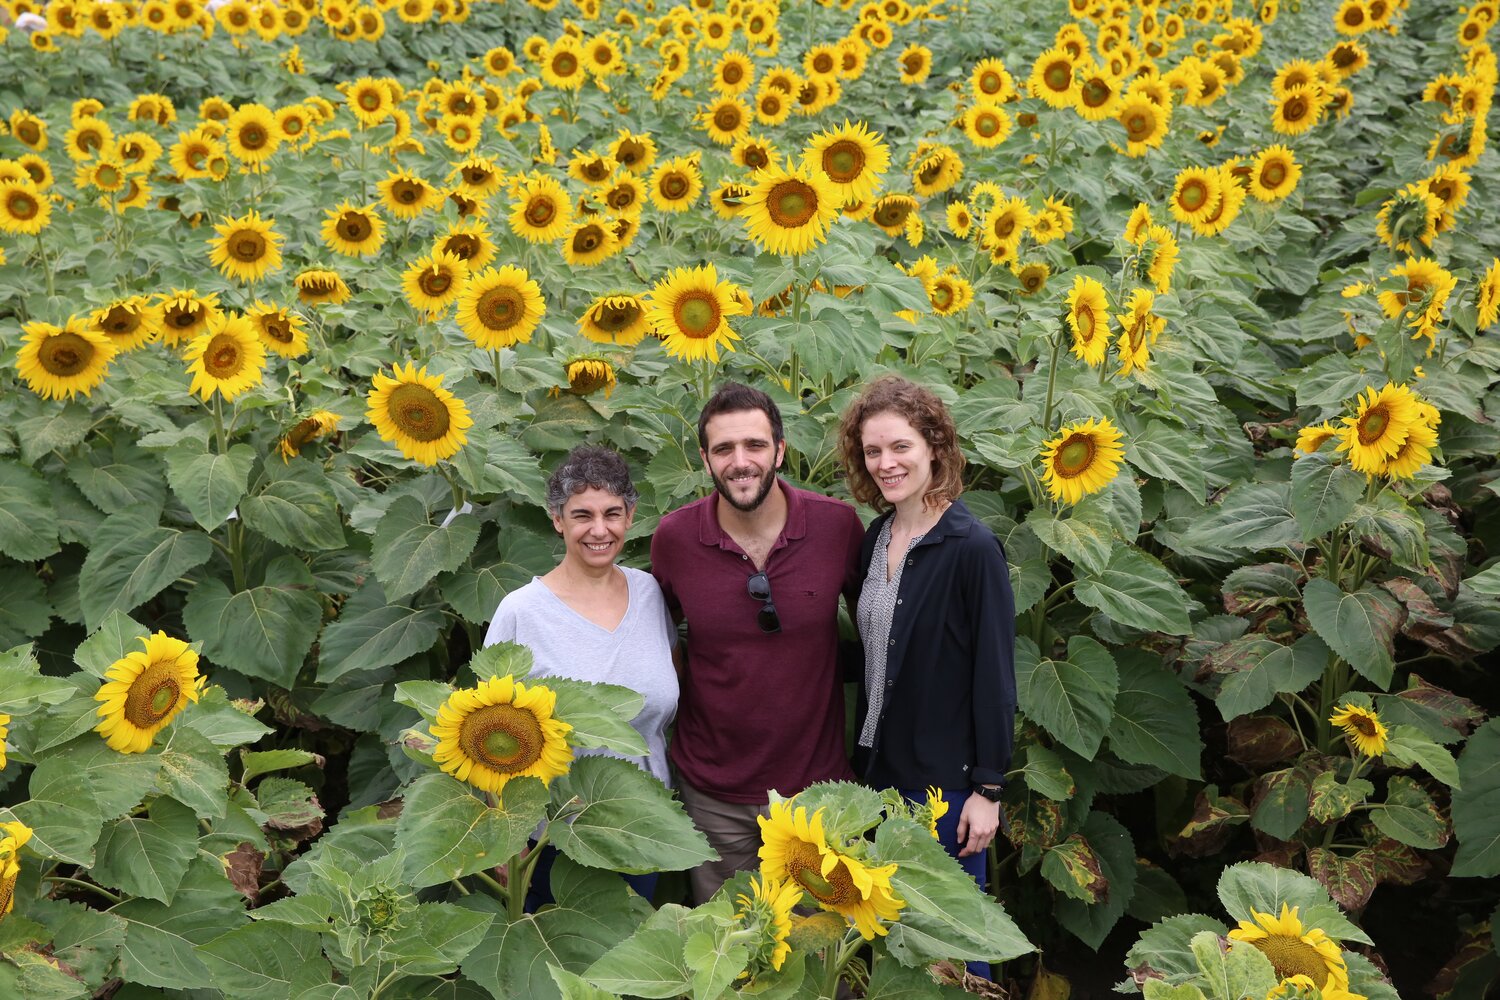 Day 1: We were welcomed by Dr. Ruth Heinz, Director of the INTA Research Center for Agricultural and Veterinarian Sciences (CICVyA), as well as several sunflower researchers, students, and technicians. Pictured here (from left to right) are: Norma Paniego, Principal Investigator, who is also the national leader of the Crop Wild Relatives sunflower pre-breeding project; Juan Montecchia, a postdoctoral student, who is leading the Verticillium trials; and Emily Warschefsky, a postdoctoral researcher and representative of UBC, the lead partner of this international pre-breeding effort.